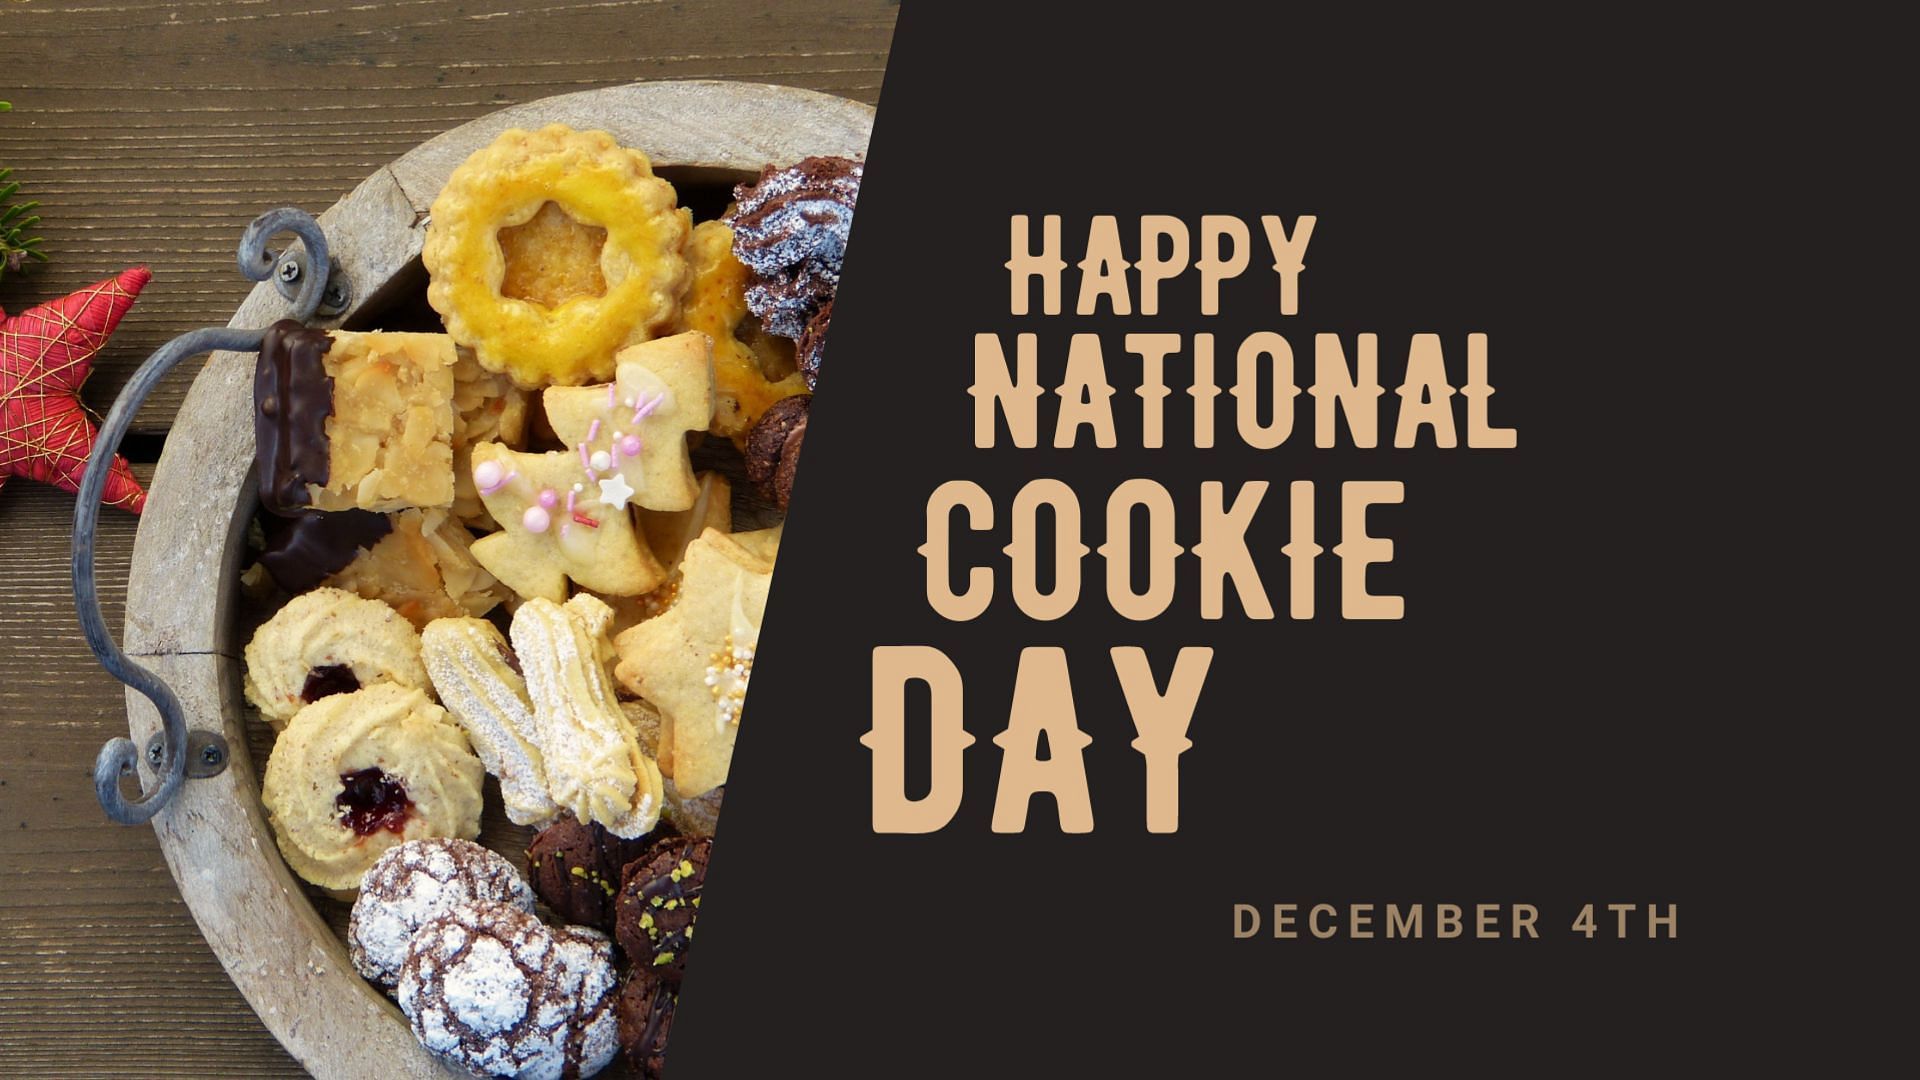 representational flyer wishing a Happy National Cookie Day (Image via Kaushal S./Canva)